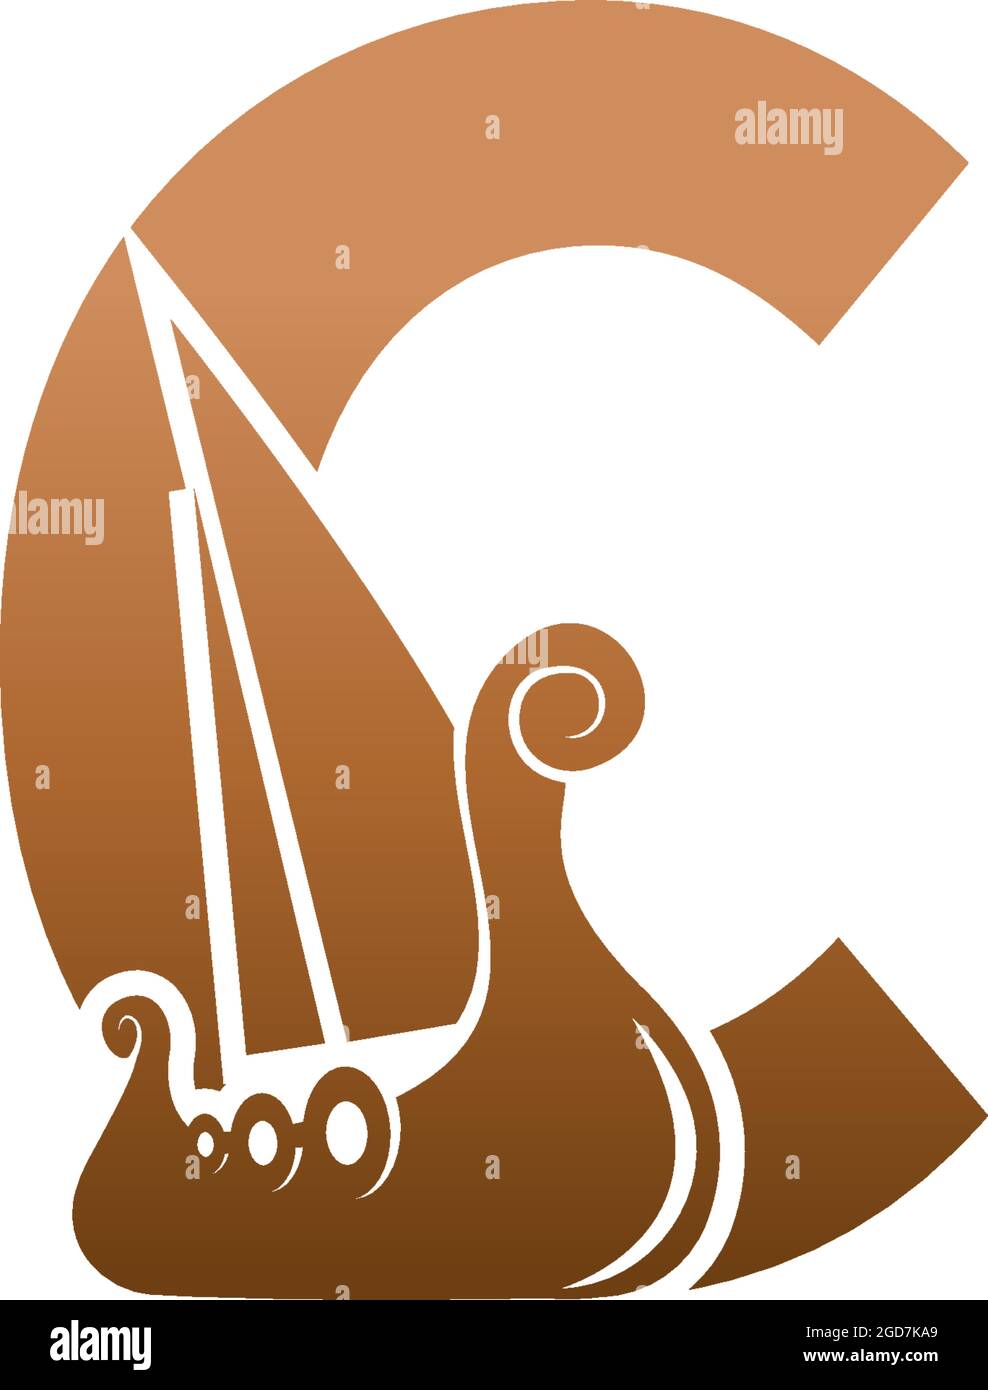 Letter C with logo icon viking sailboat design template illustration Stock Vector